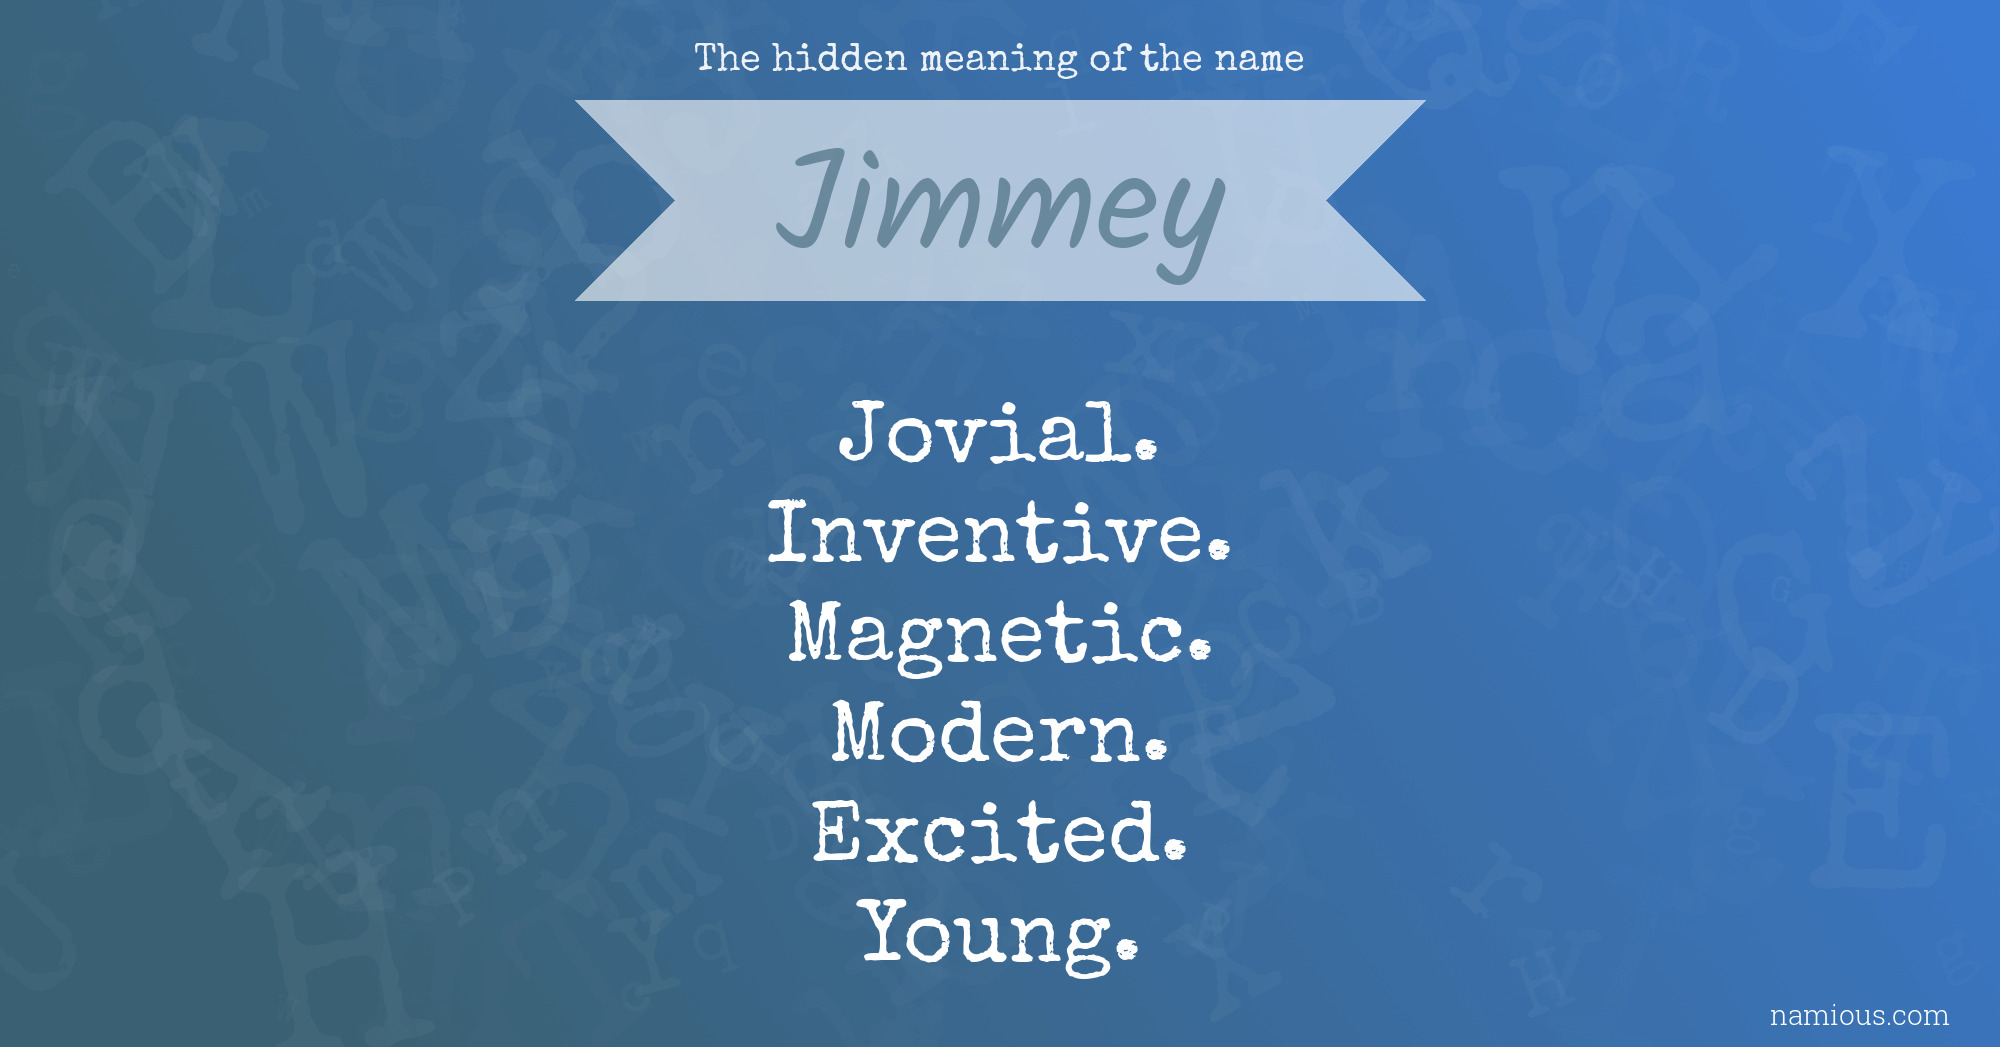 The hidden meaning of the name Jimmey